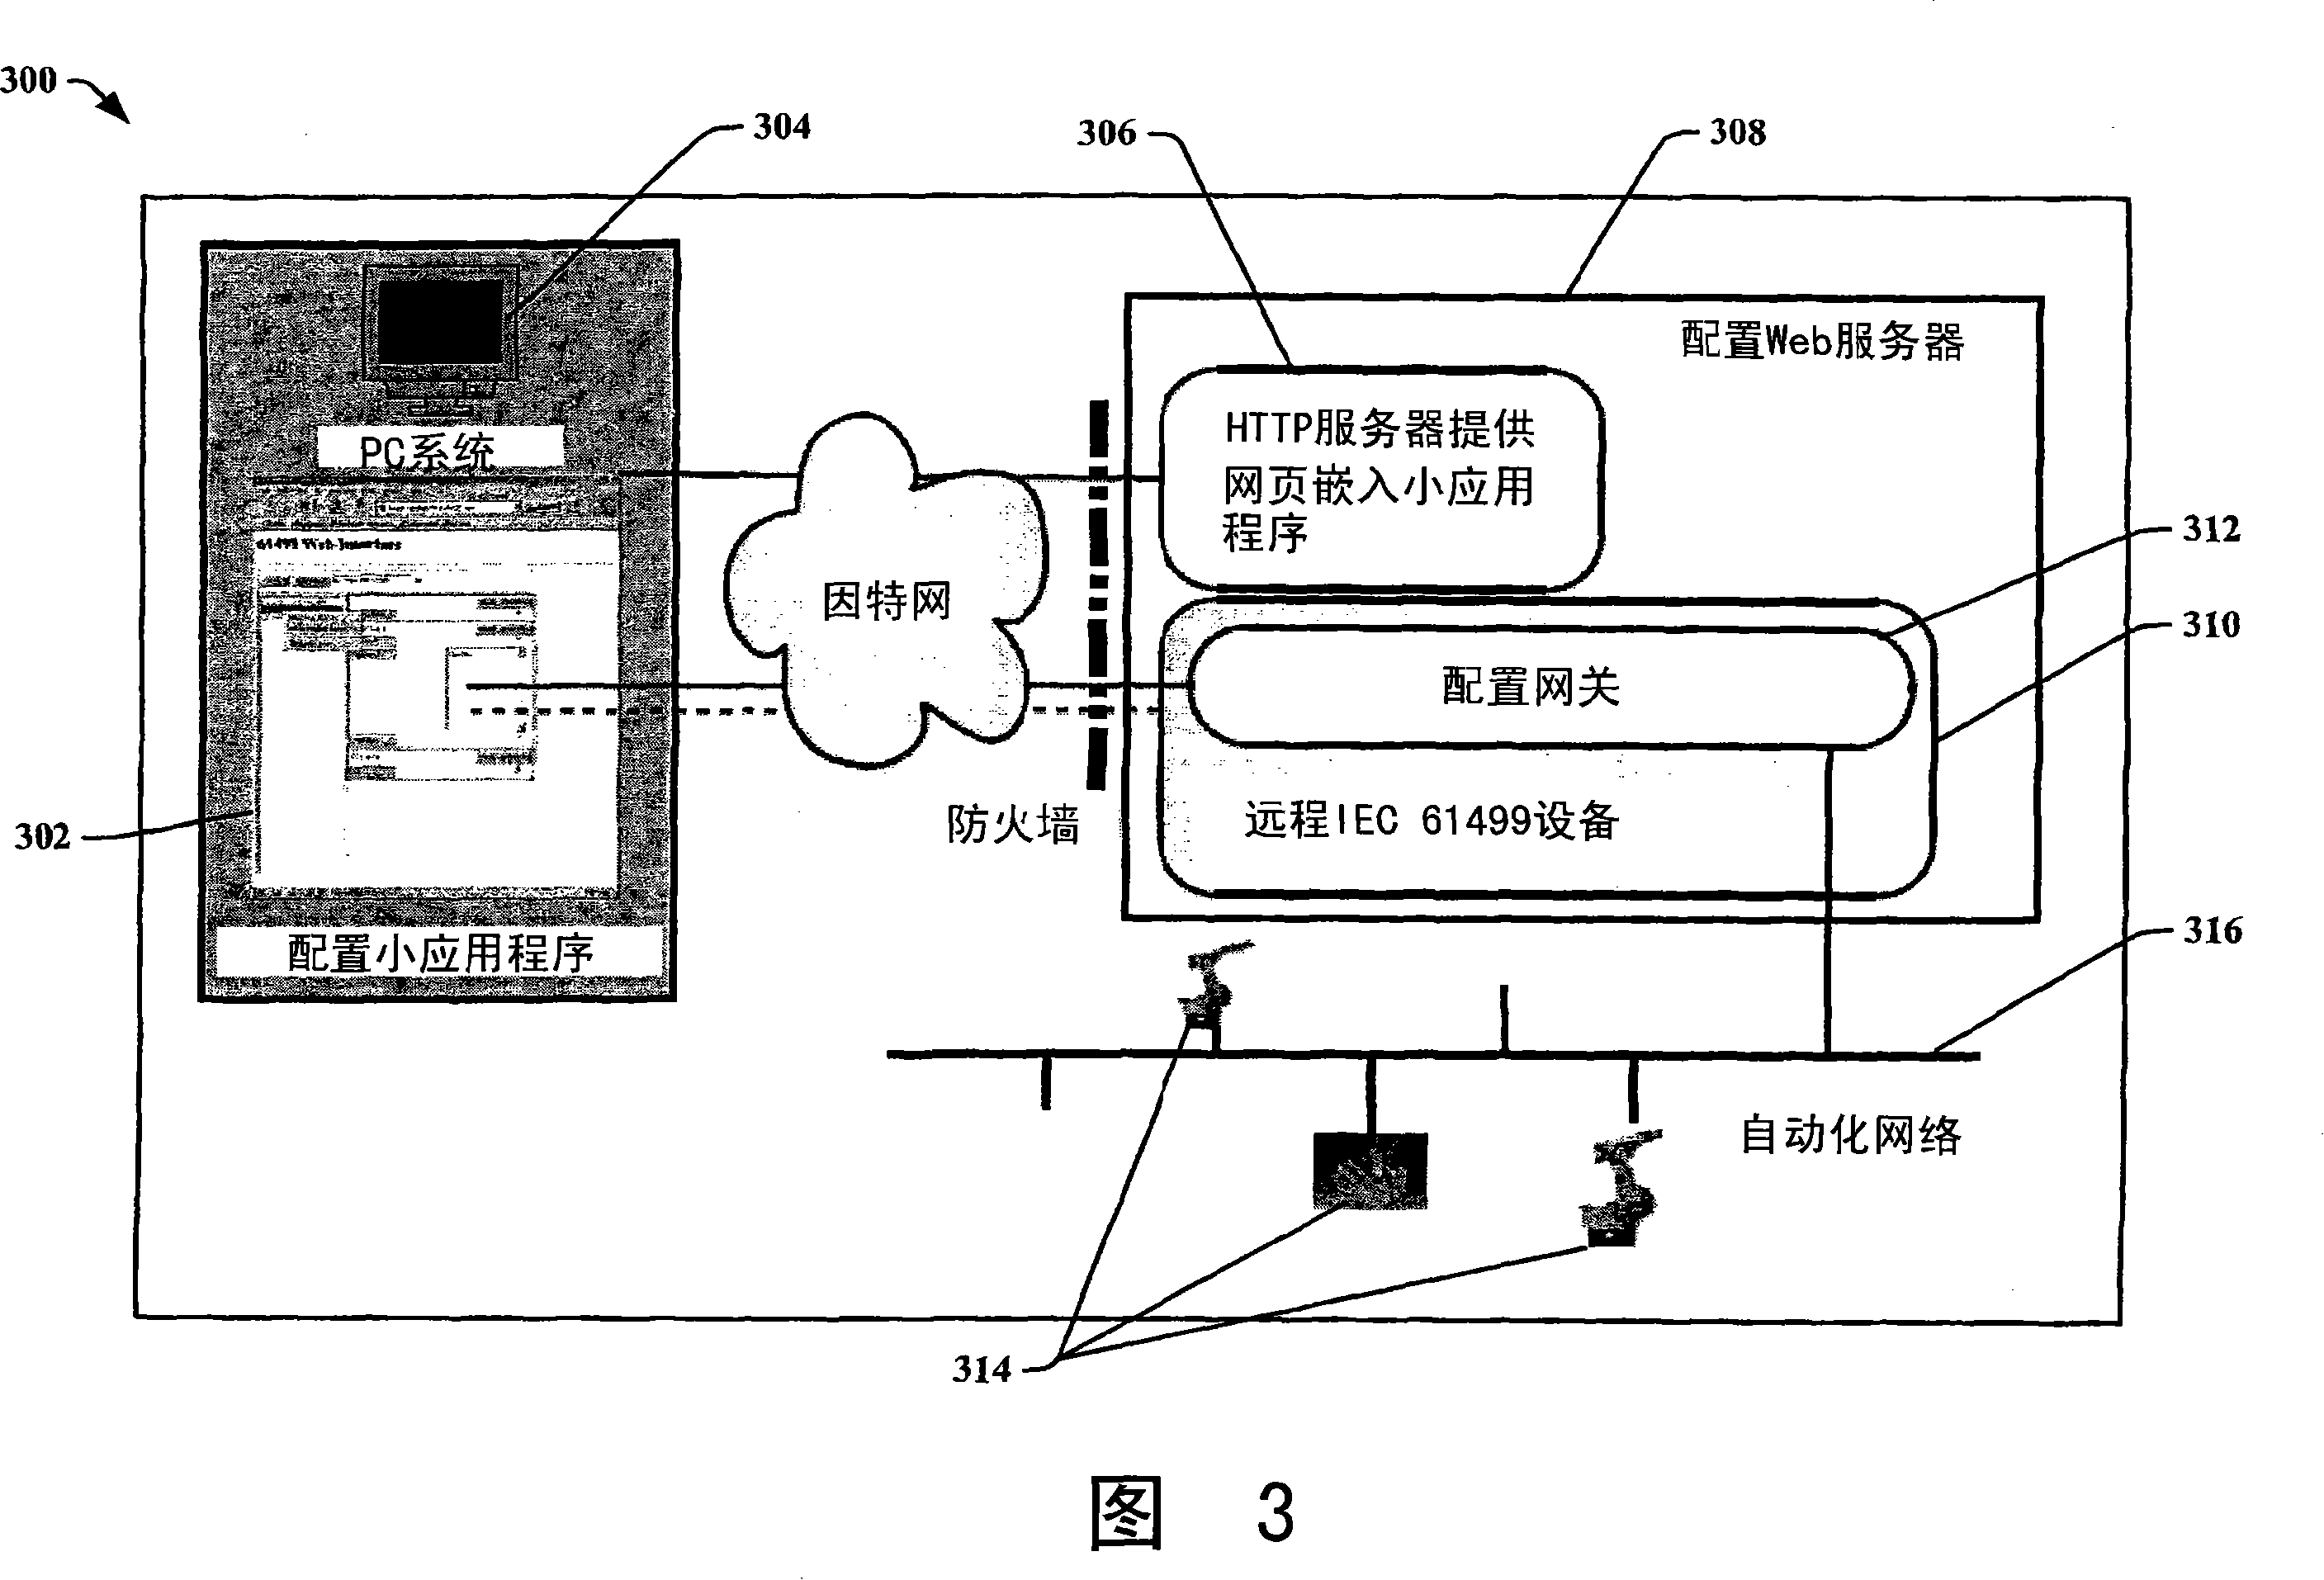 Web-based configuration of distributed automation systems